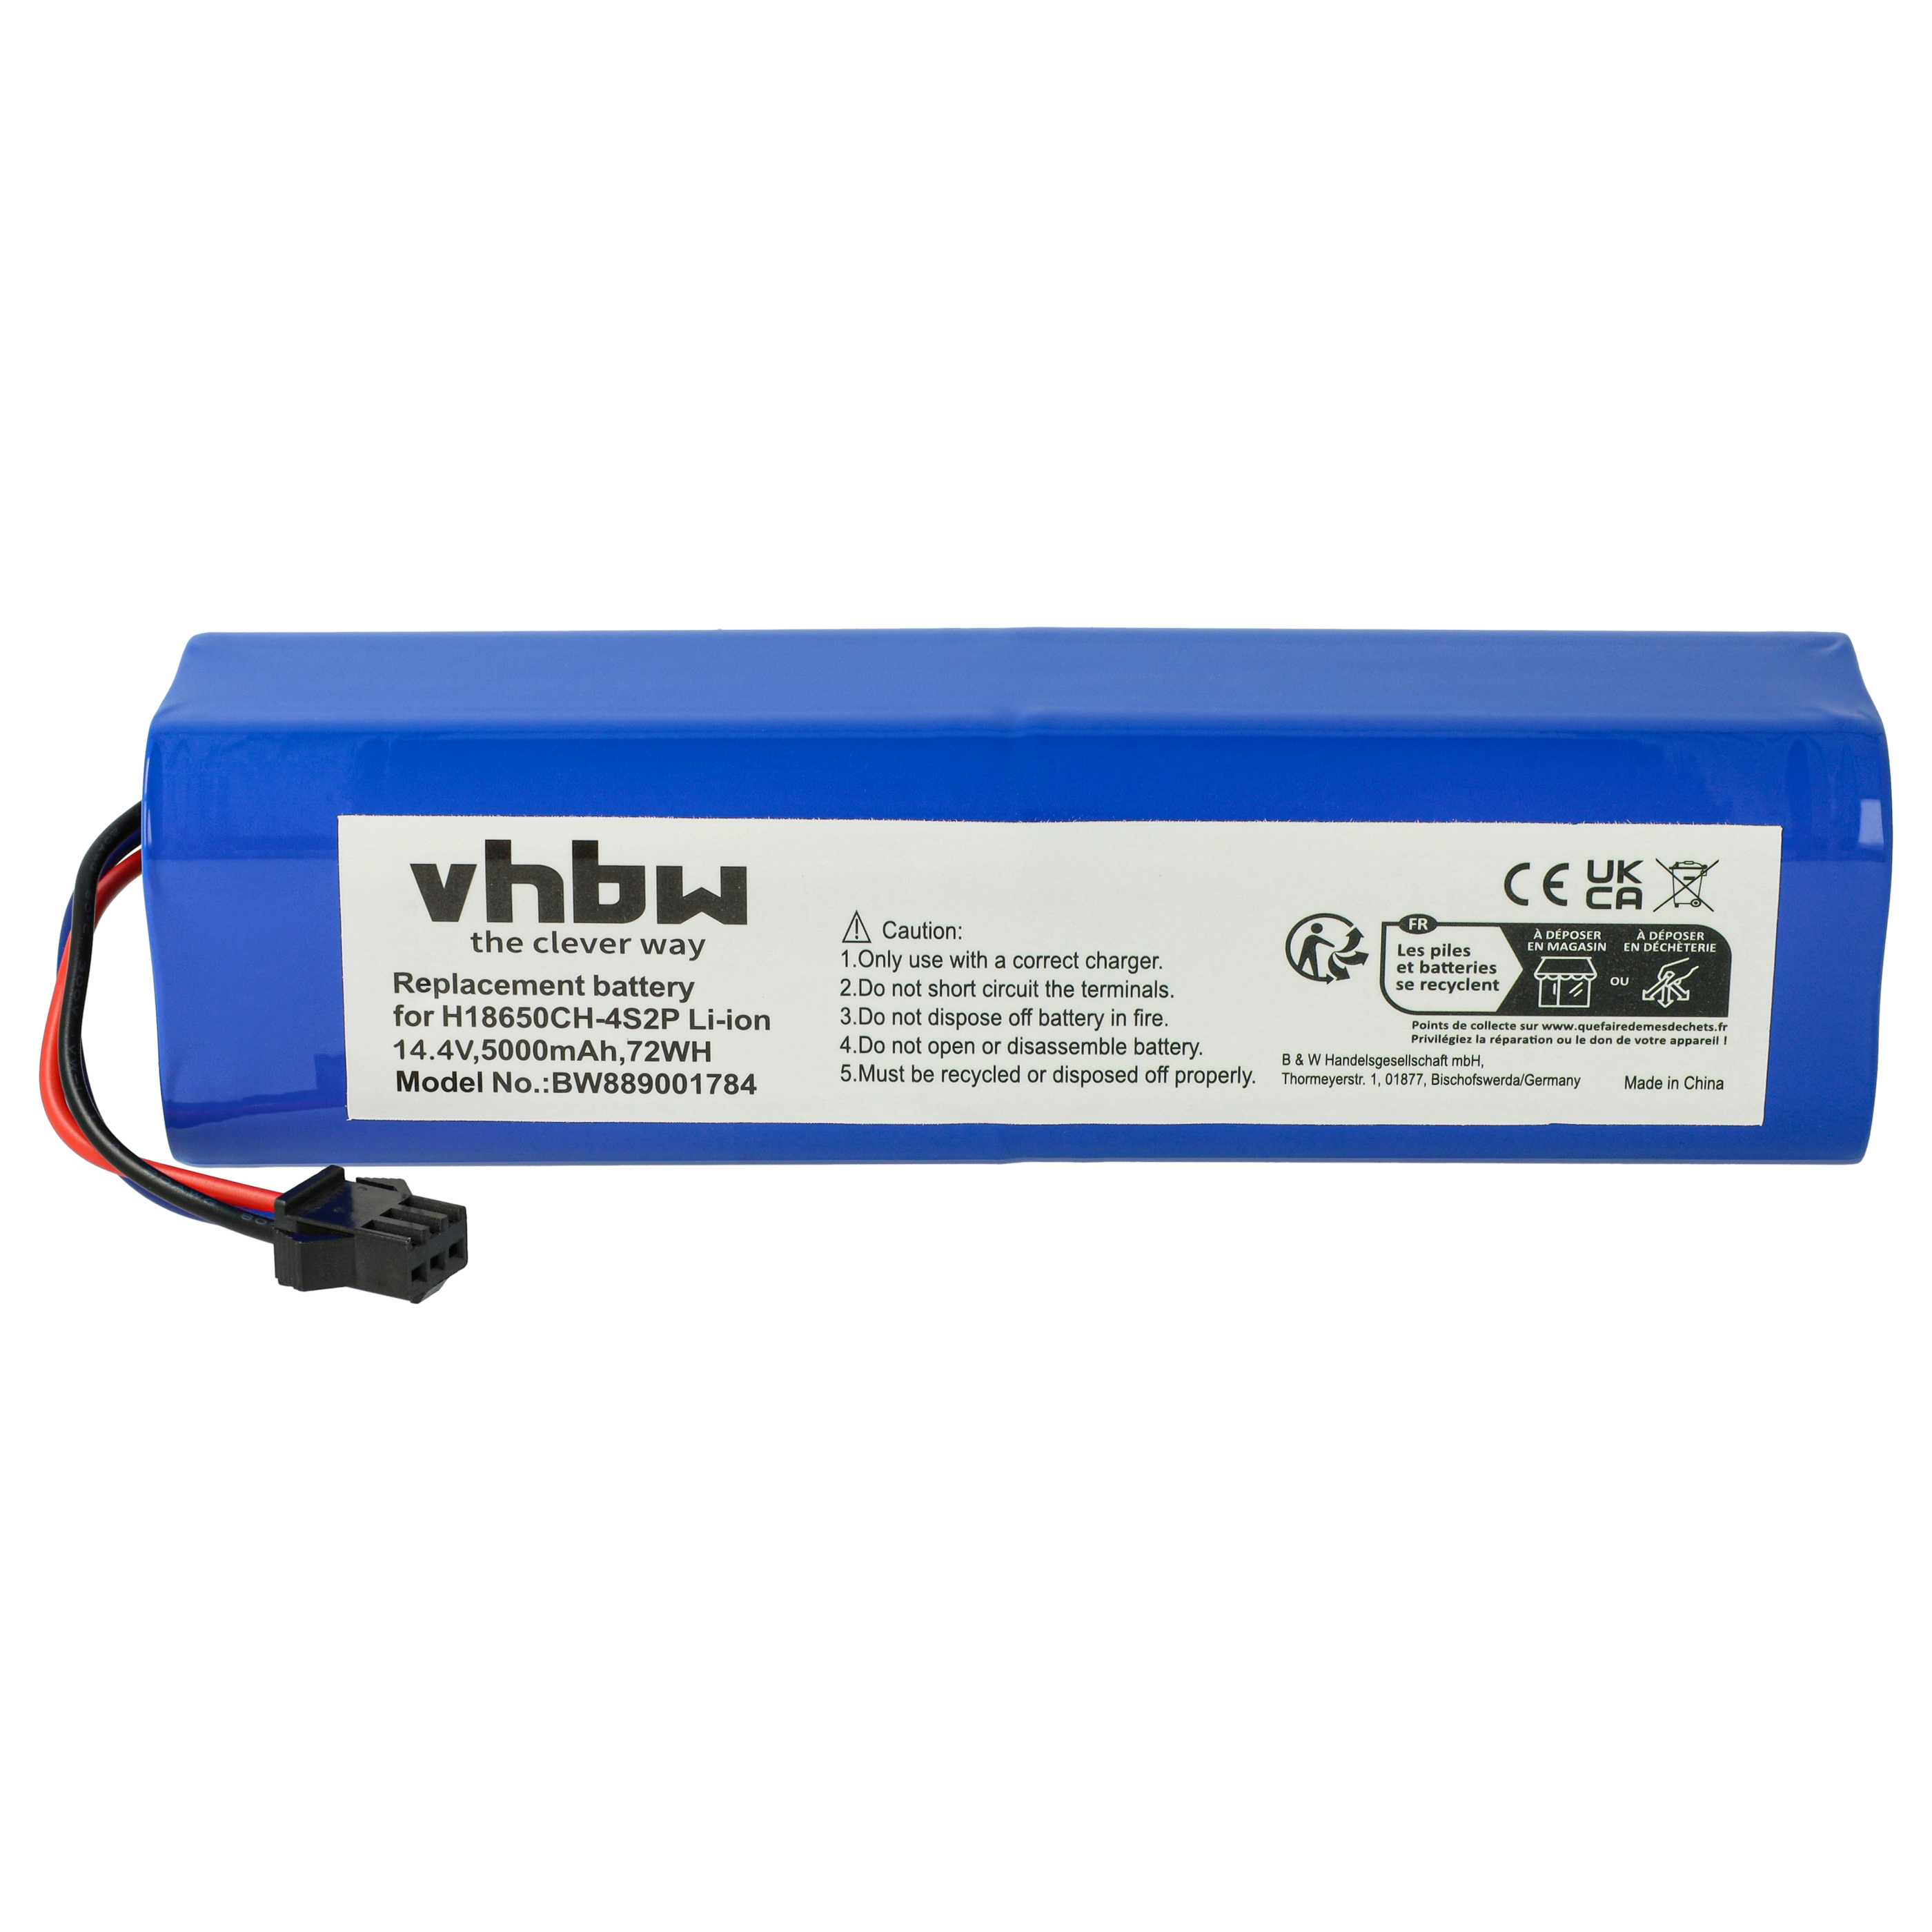 Battery Replacement for Proscenic NR18650 M26-4S2P, H18650CH-4S2P for - 5000mAh, 14.4V, Li-Ion